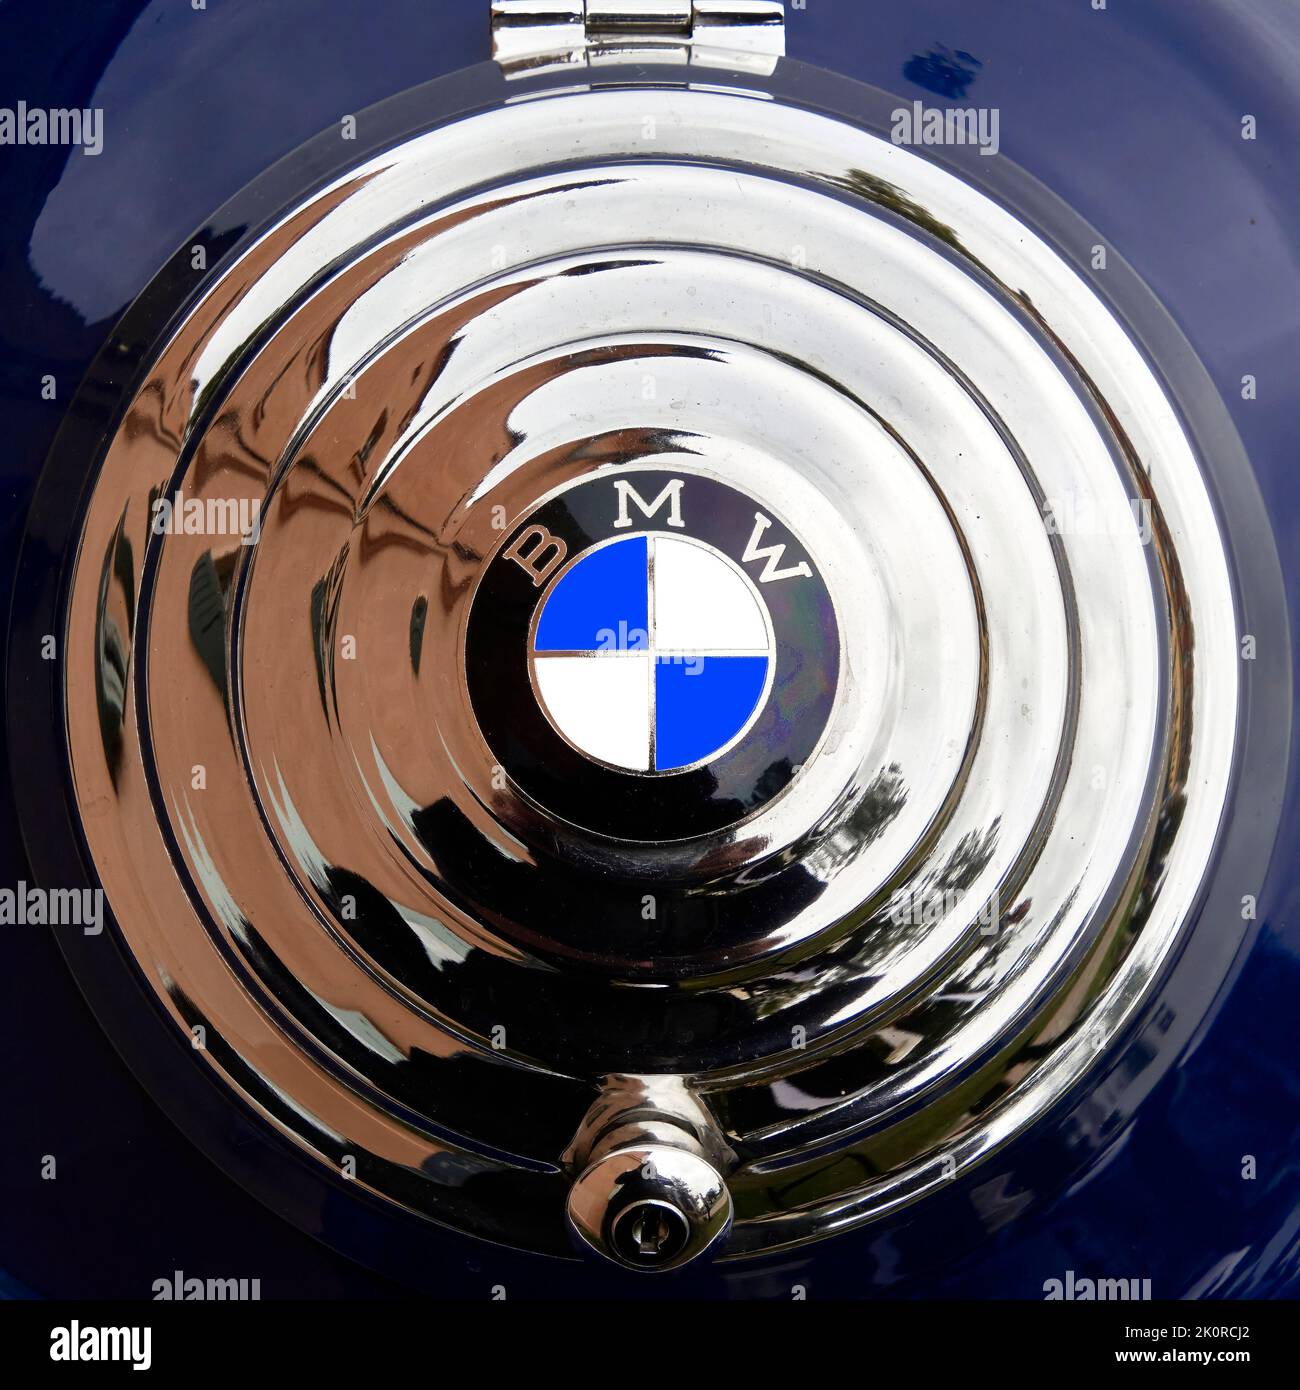 BMW logo in blue and white on the spare wheel cover of a classic car of the Bavarian car manufacturer in Lehnin, Germany, September 11, 2022 Stock Photo